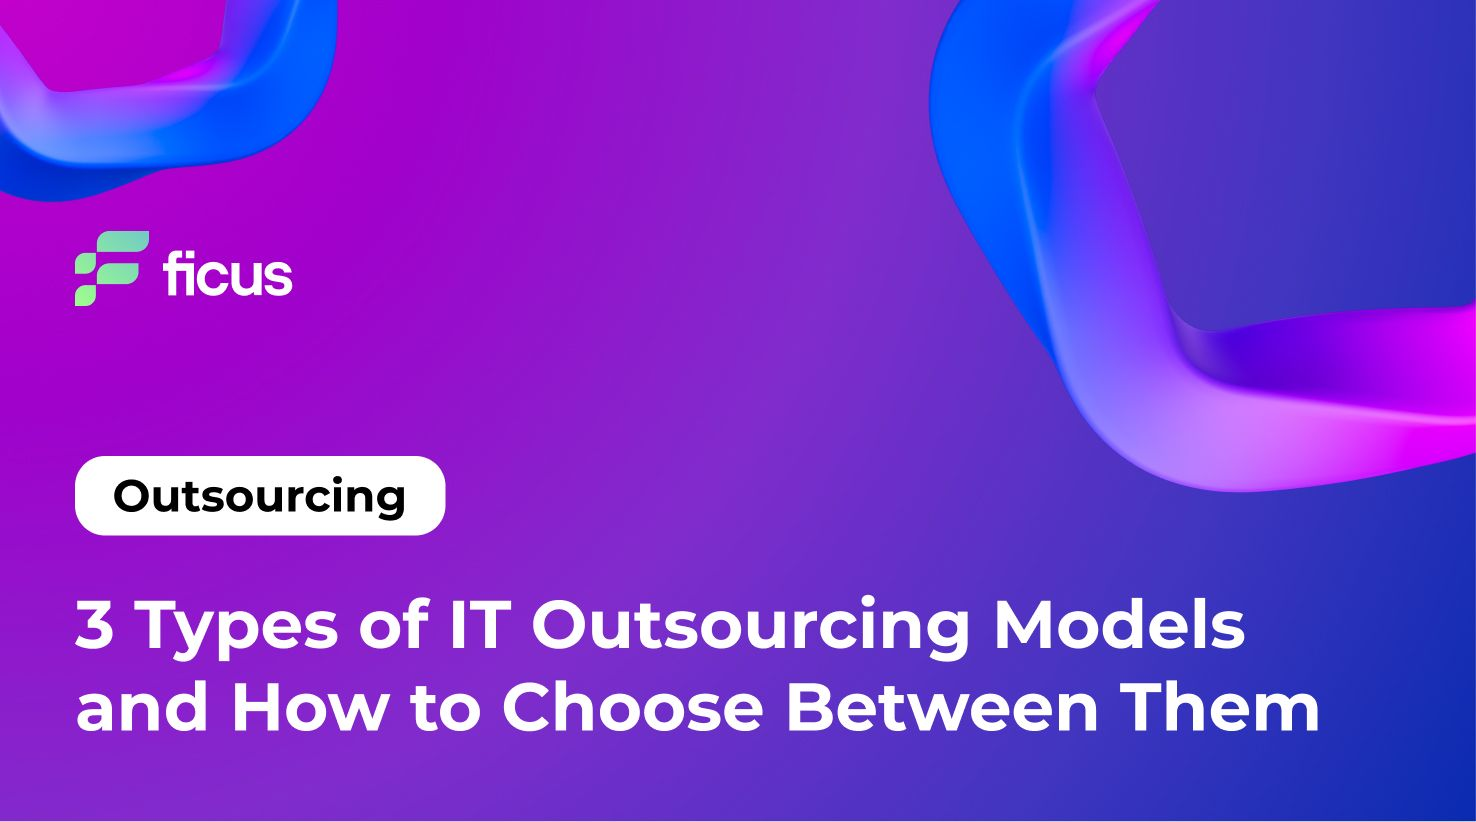 3 Types of IT Outsourcing Models and How to Choose Between Them